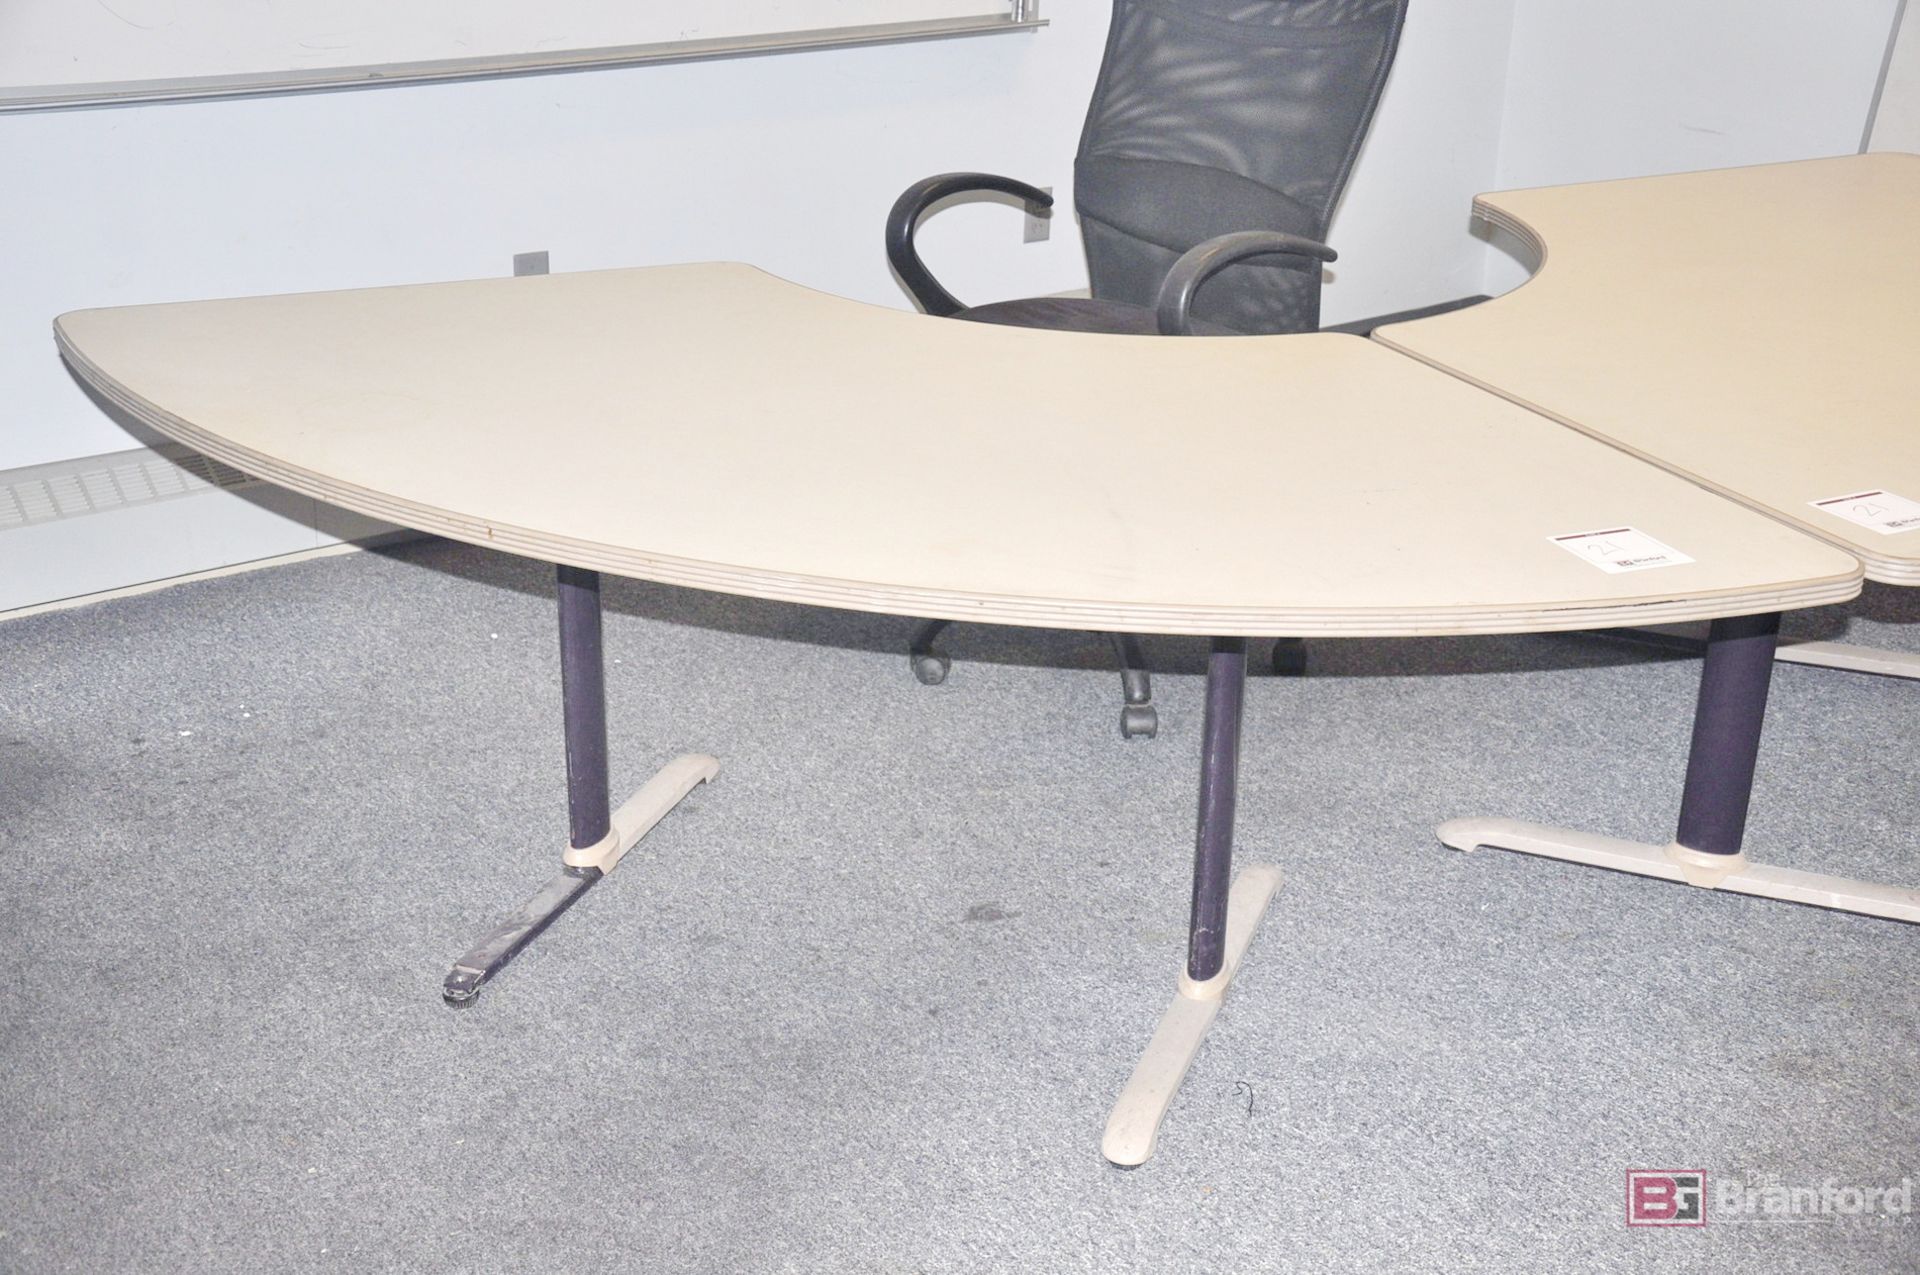 (2) Curved tables